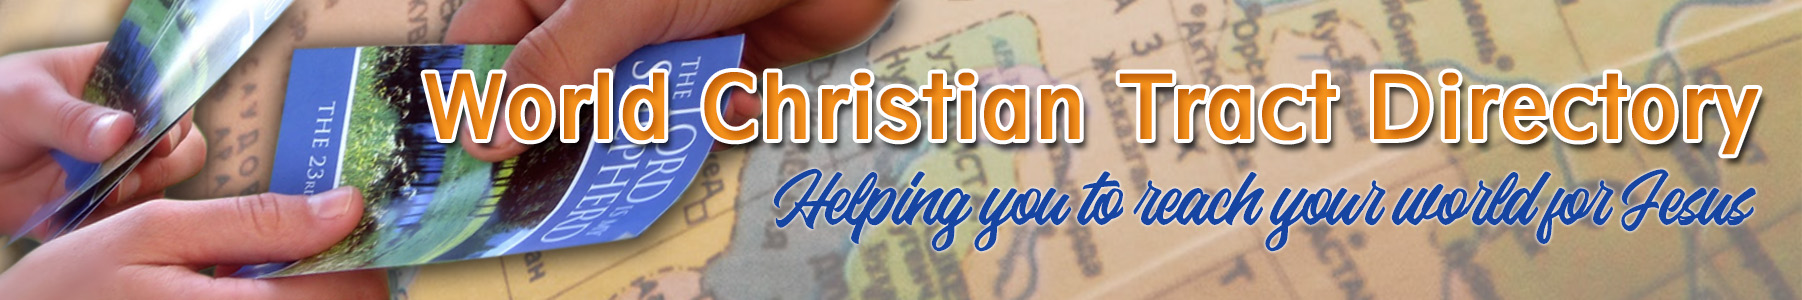 World Christian Tract Directory